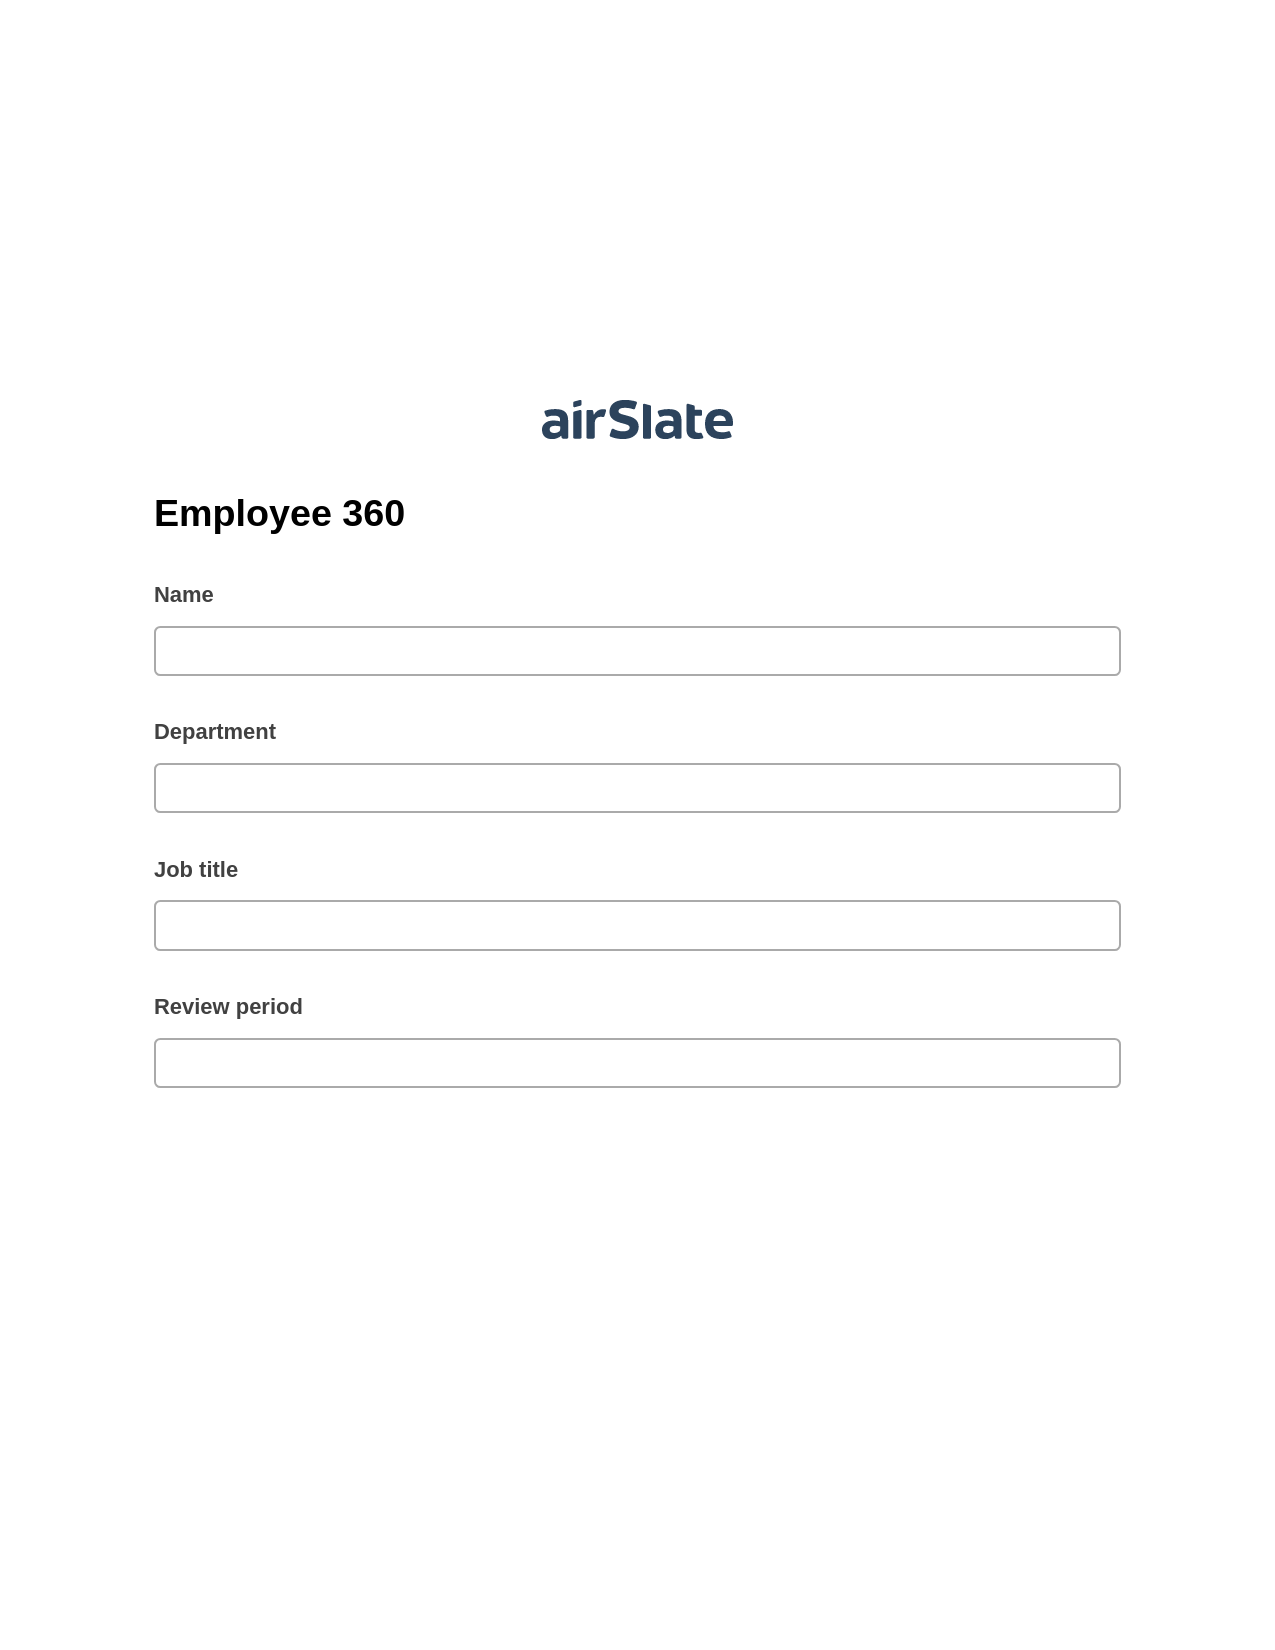 Multirole Employee 360 Pre-fill Dropdowns from Airtable, Update MS Dynamics 365 Record Bot, Archive to Google Drive Bot